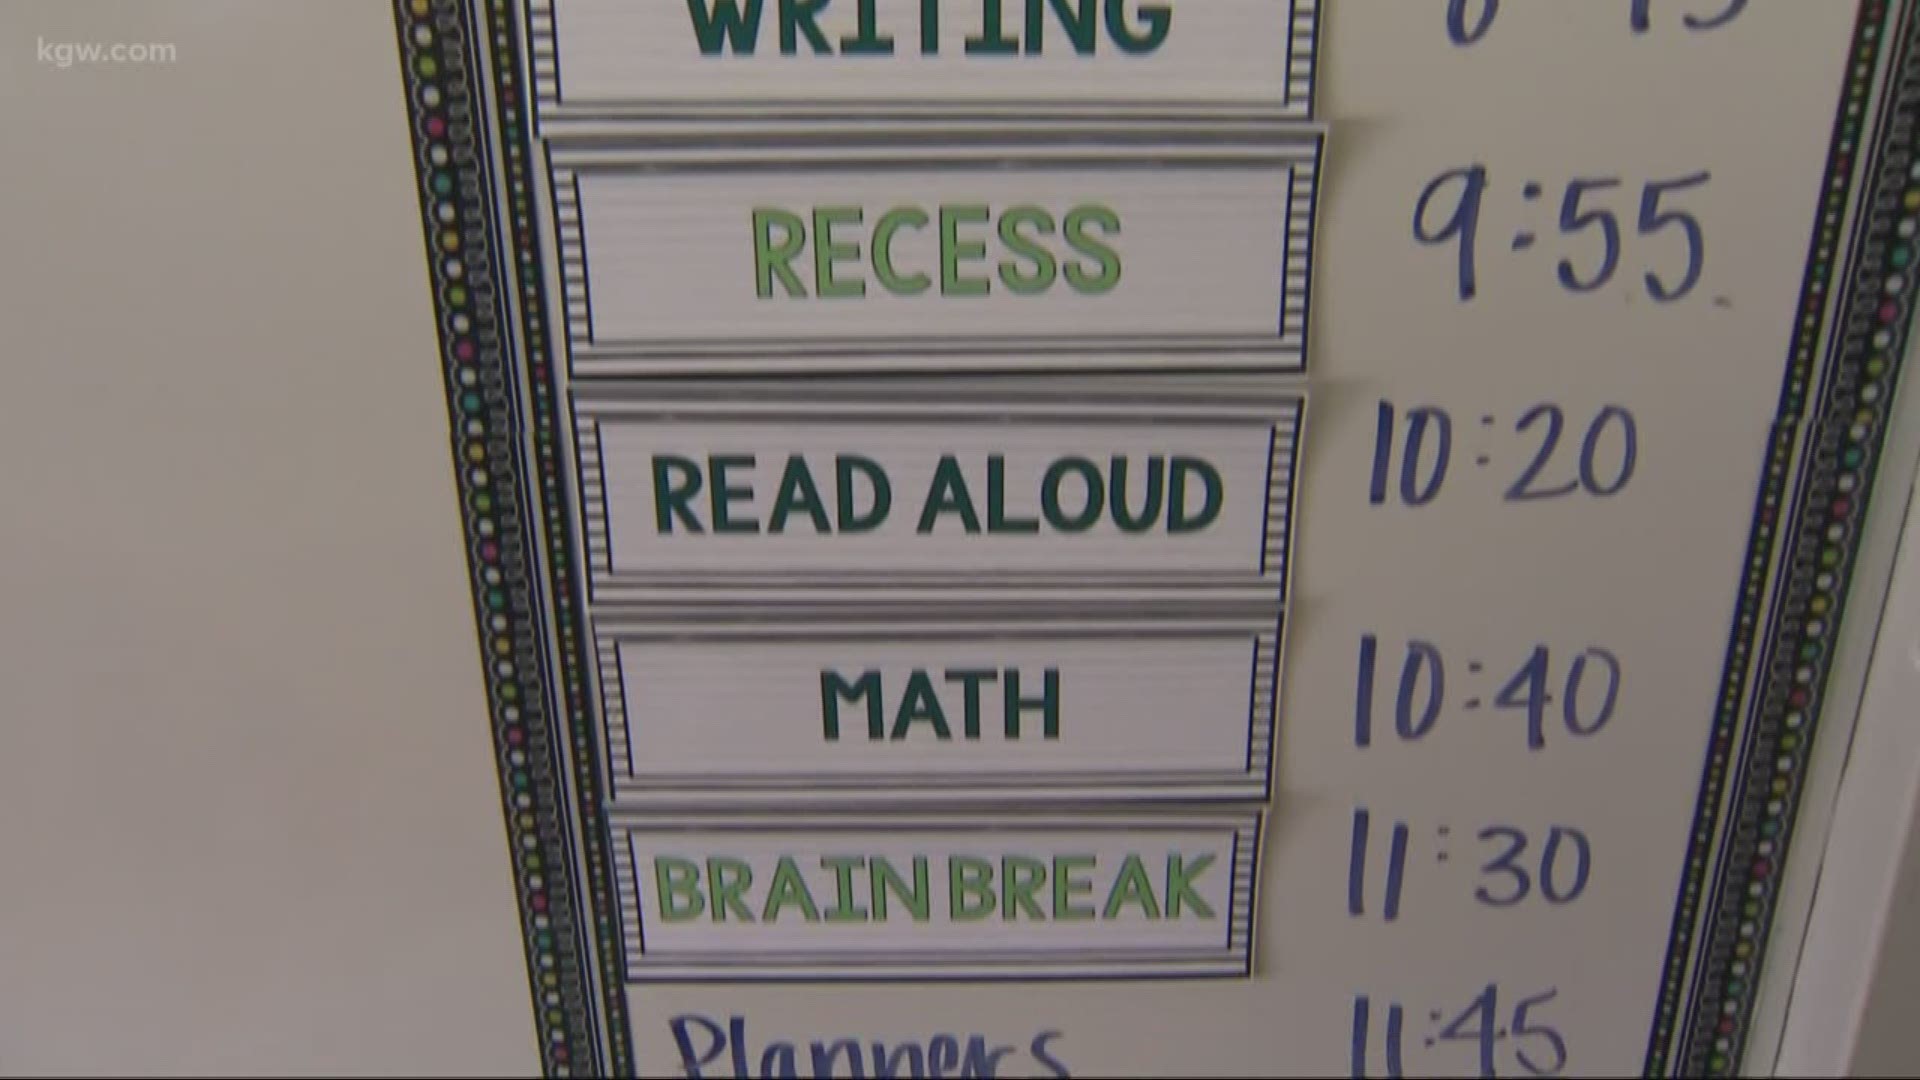 Second graders at a West Linn school offers tips on how to do well in class.